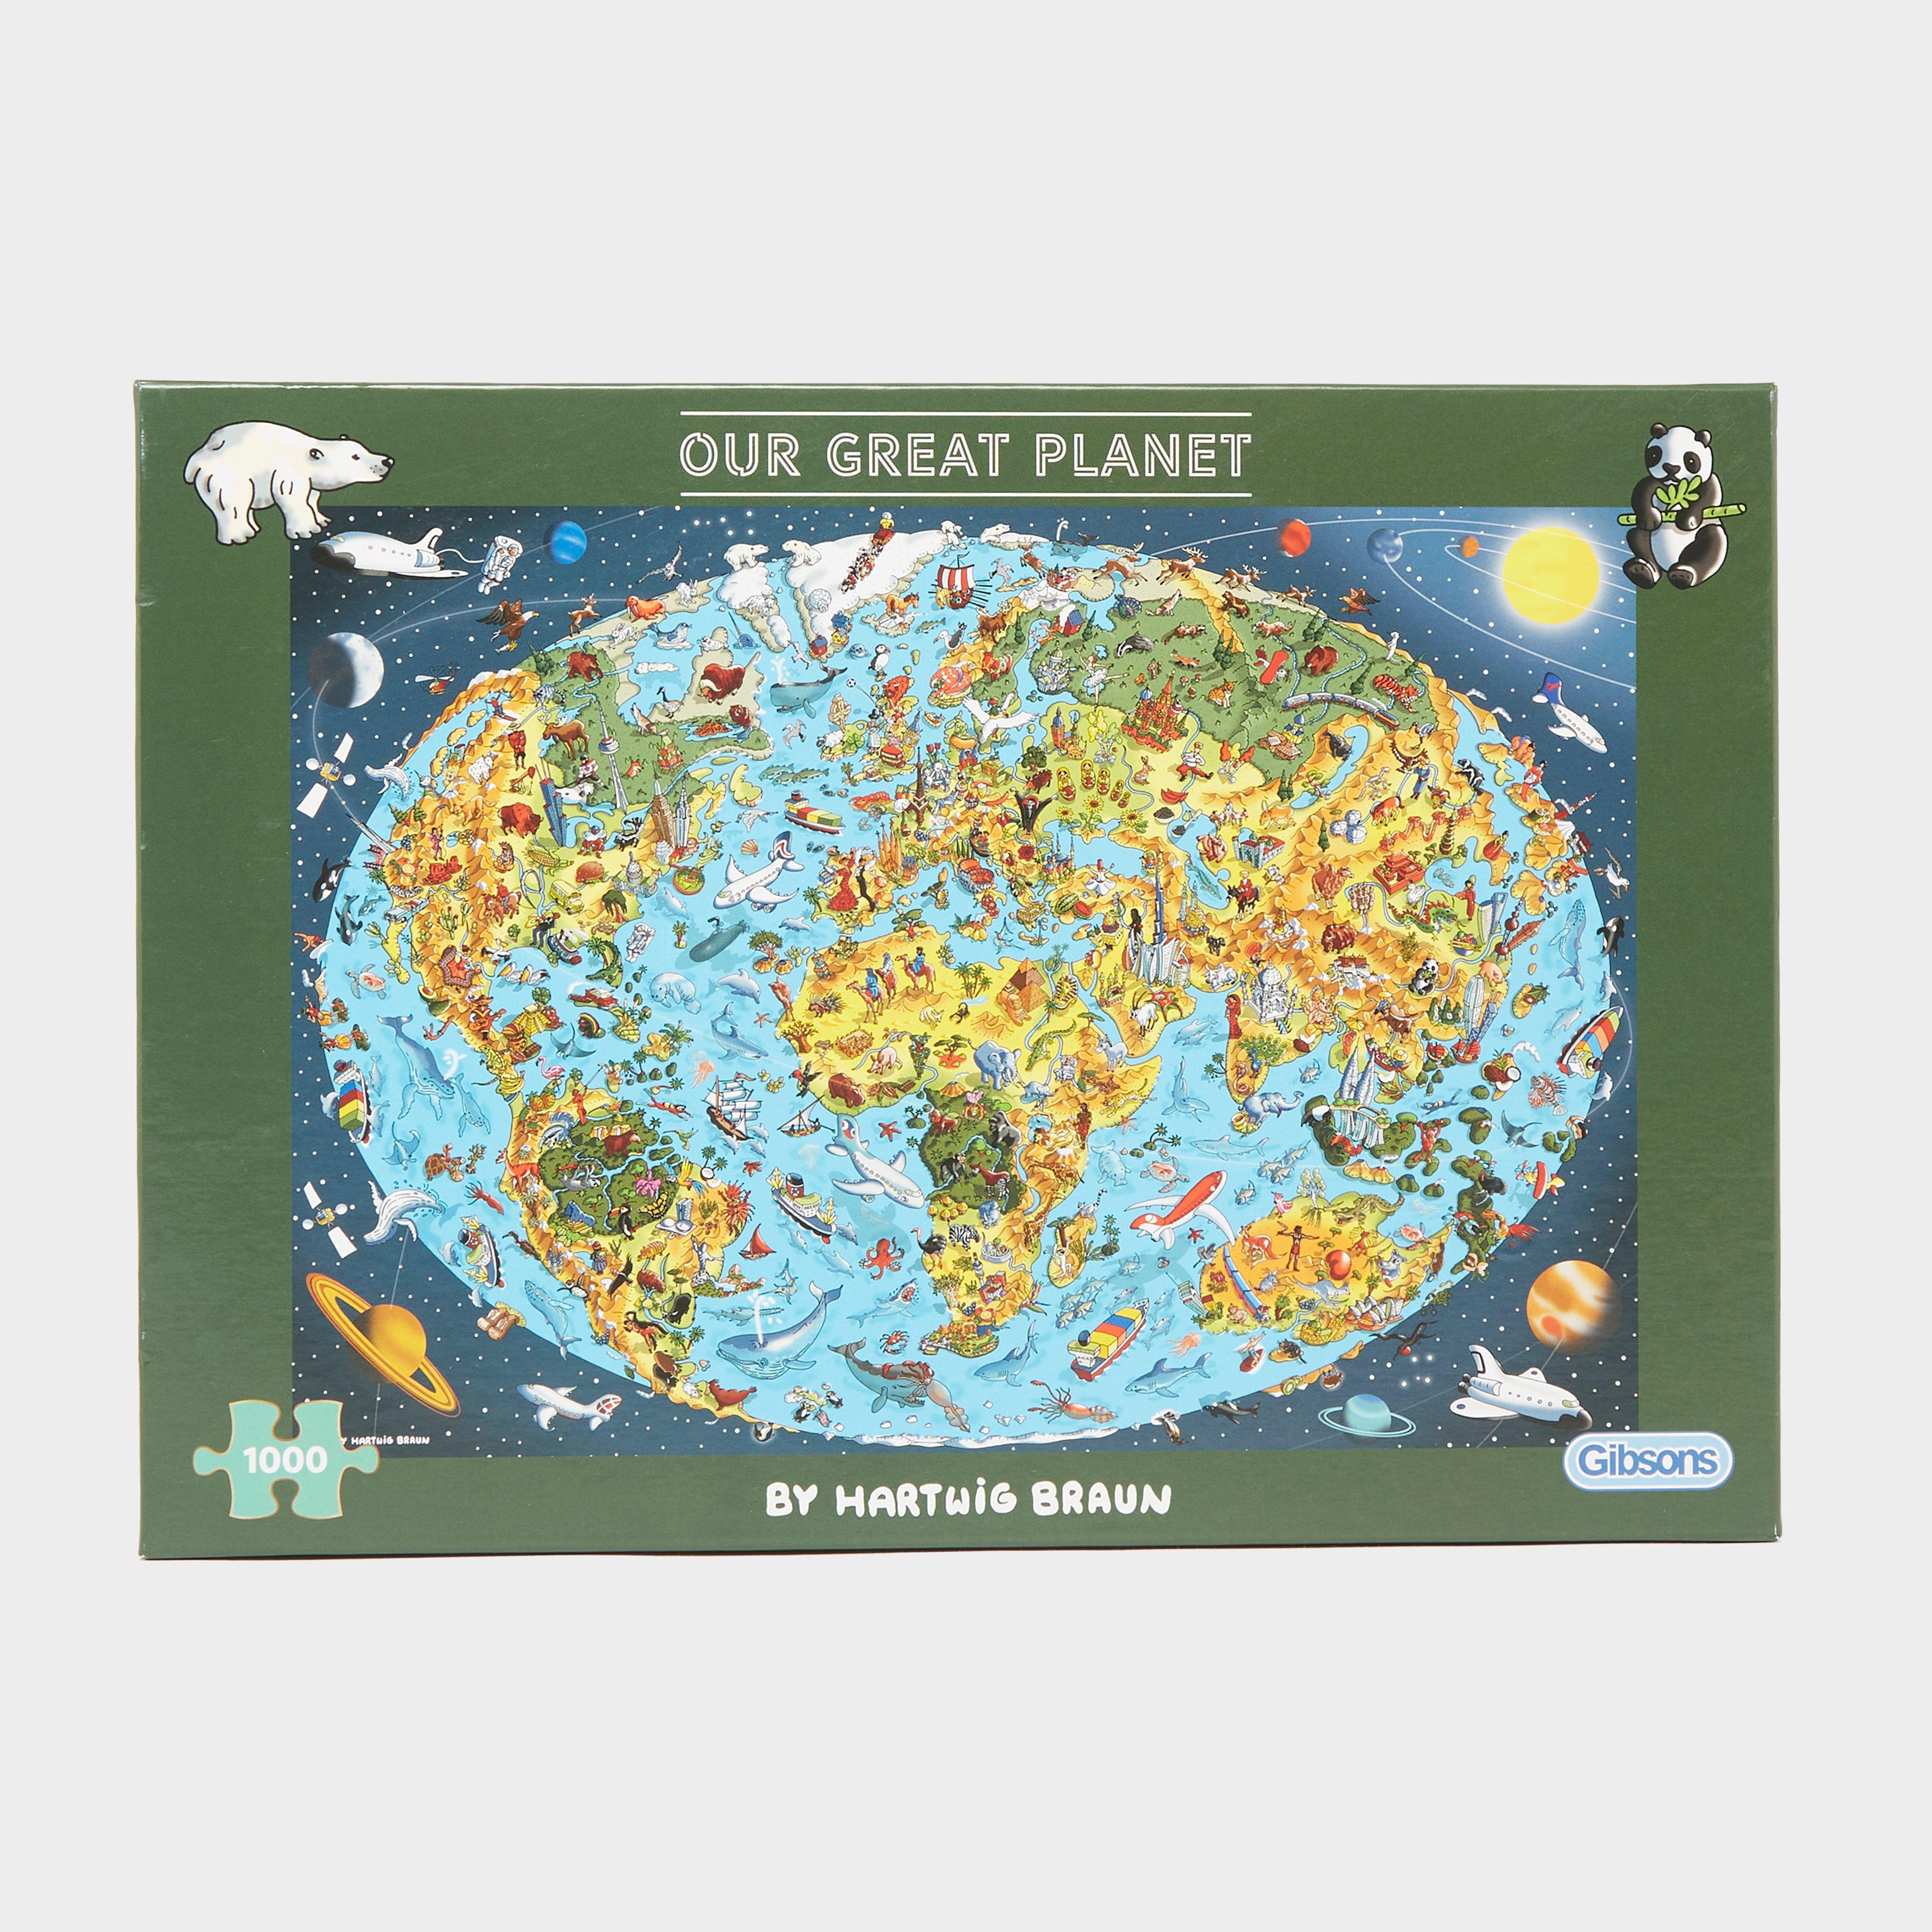 Gibsons Our Great Planet 1000 Piece Jigsaw Puzle - Green/green  Green/green